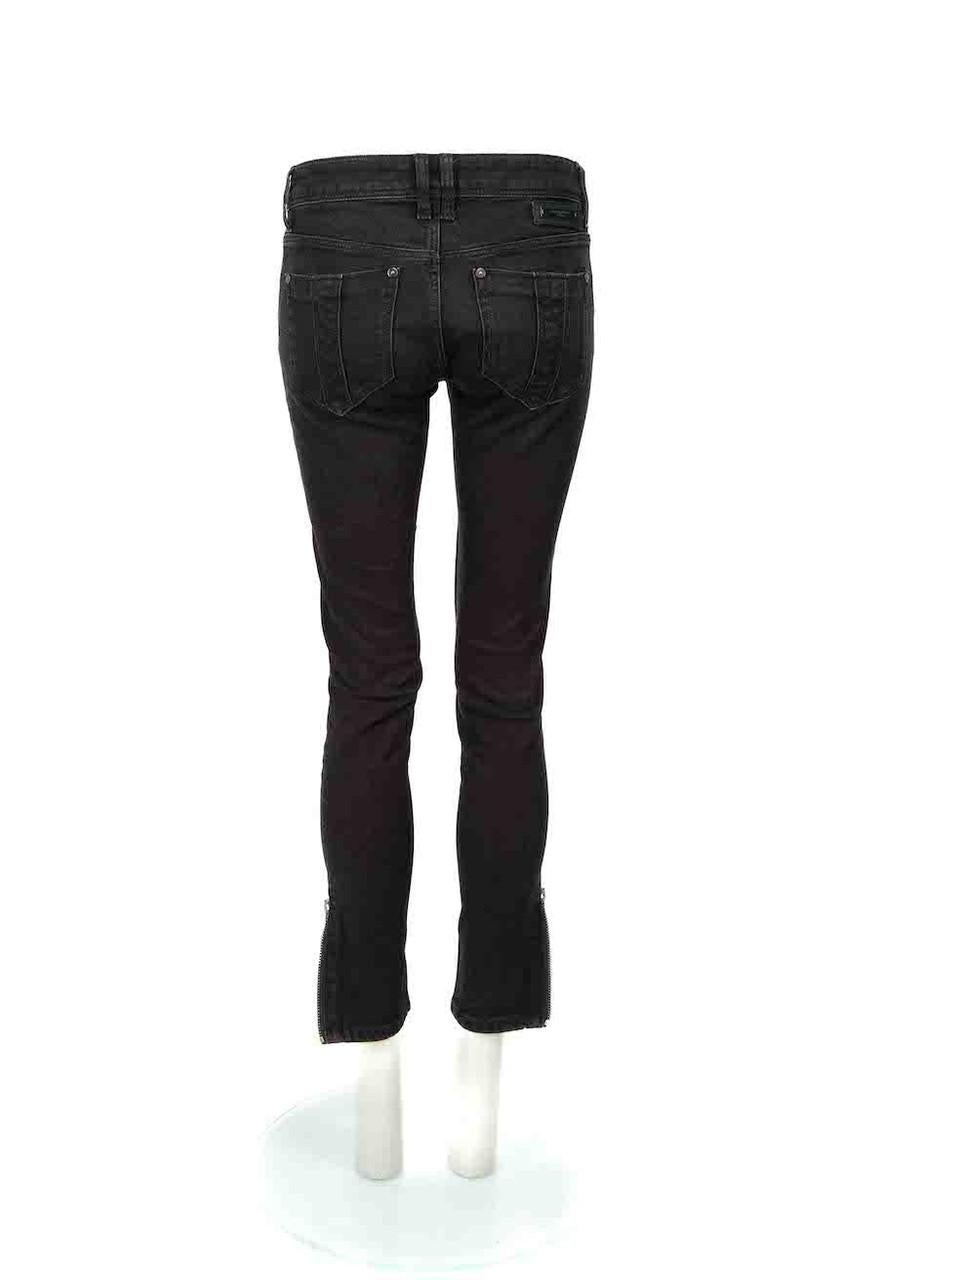 Burberry Black Zipped Cuff Skinny Jeans Size S In Excellent Condition For Sale In London, GB